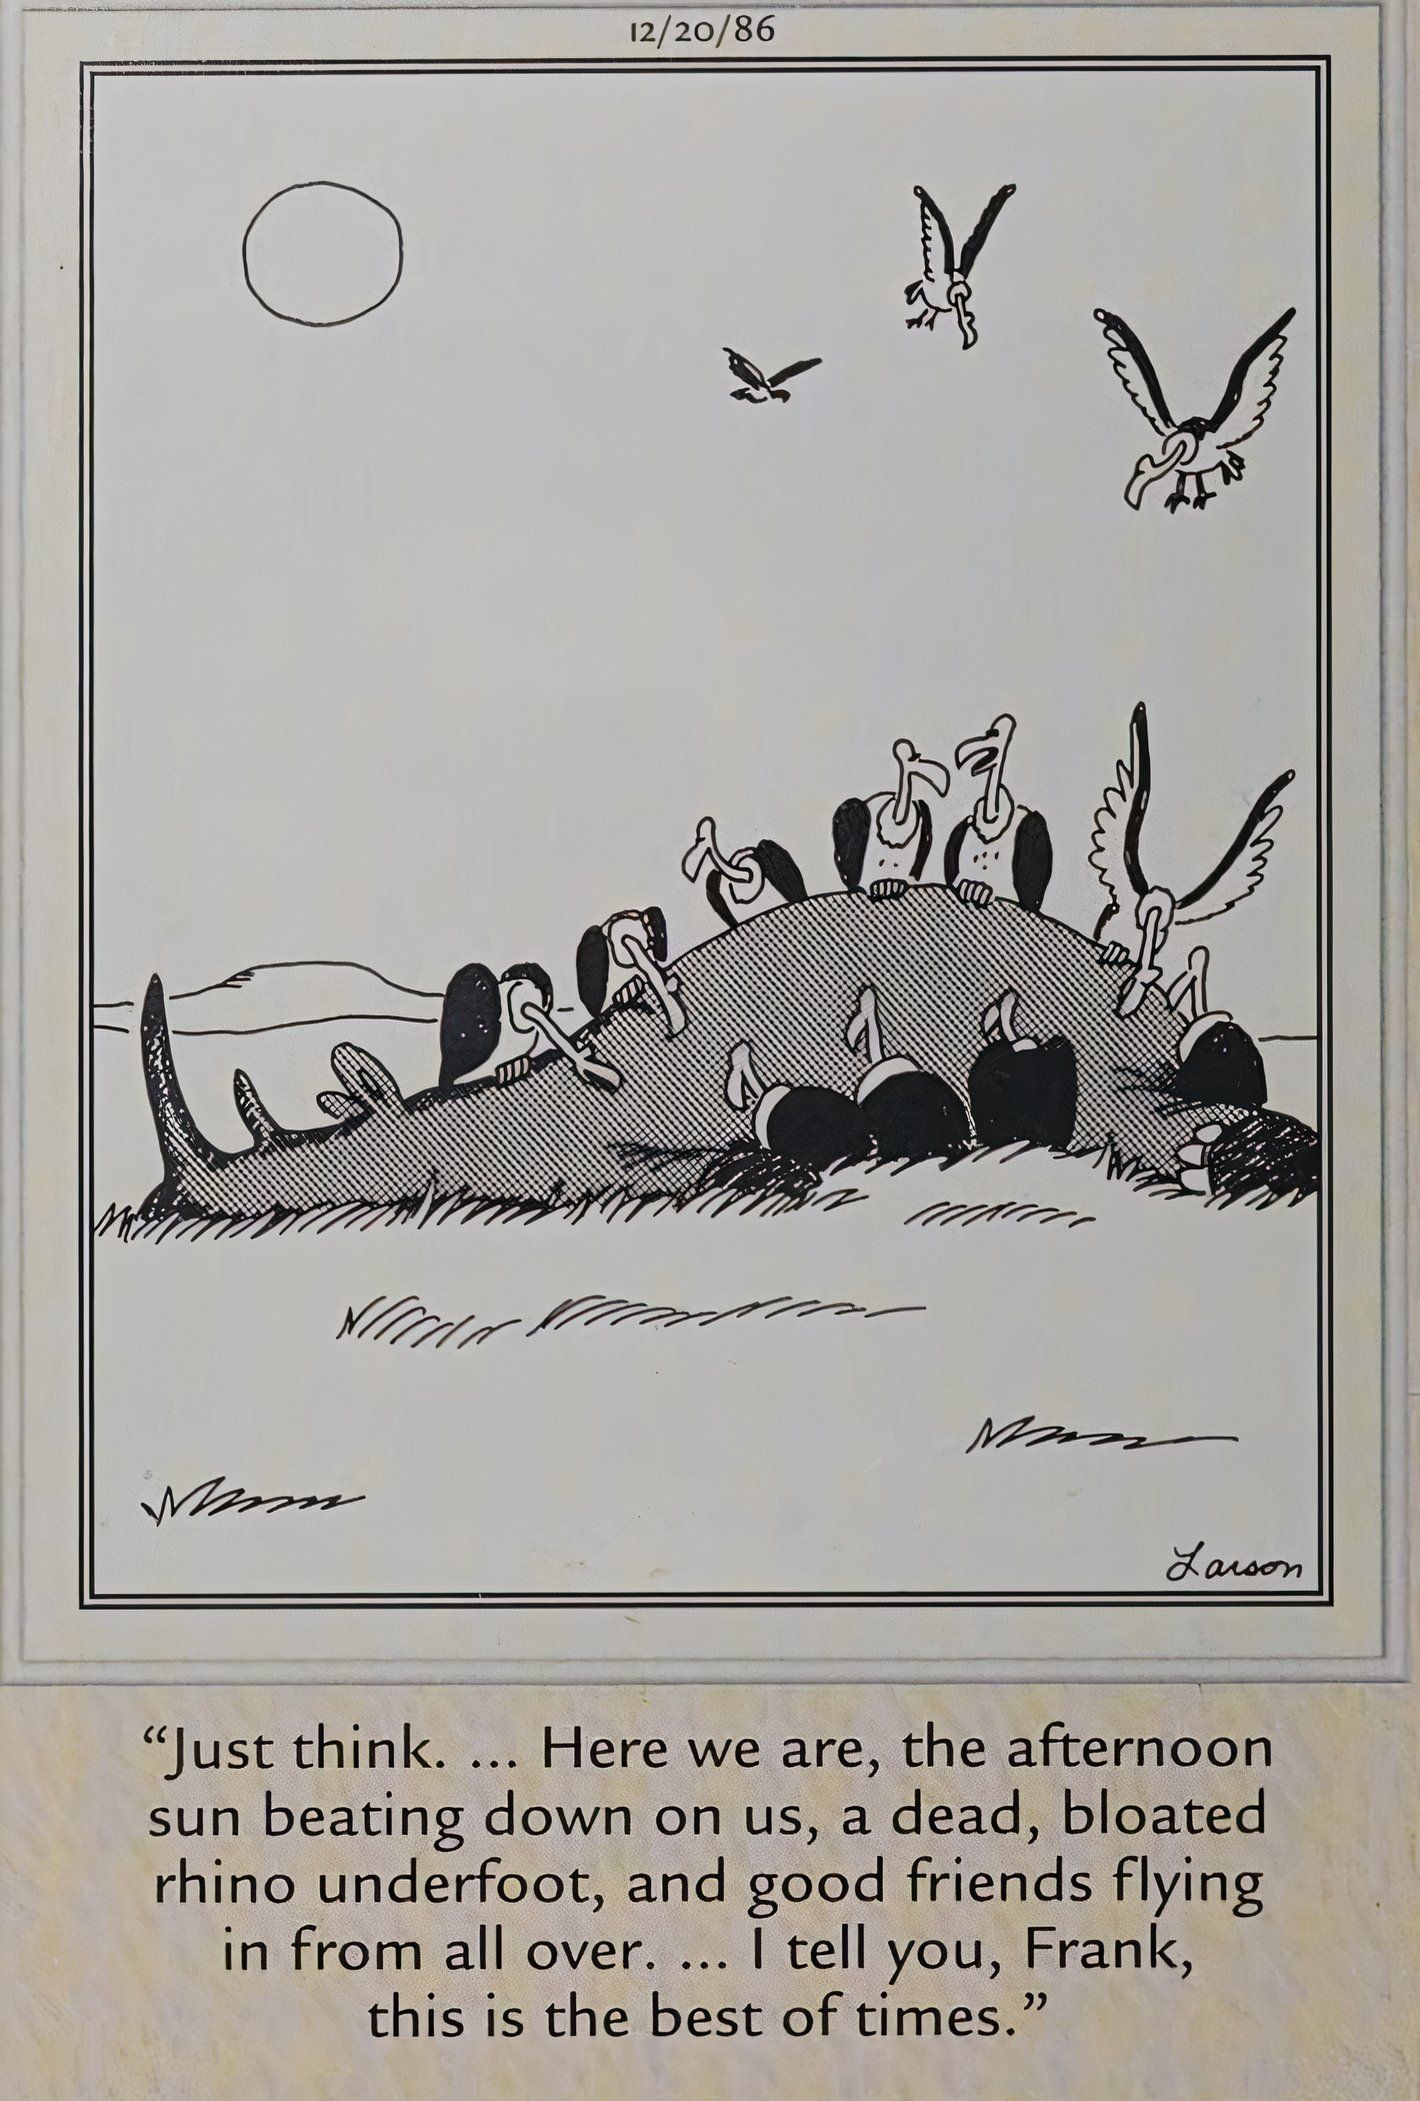 Far Side, the best of times for vultures, as they gathered around the carcass of a rhino